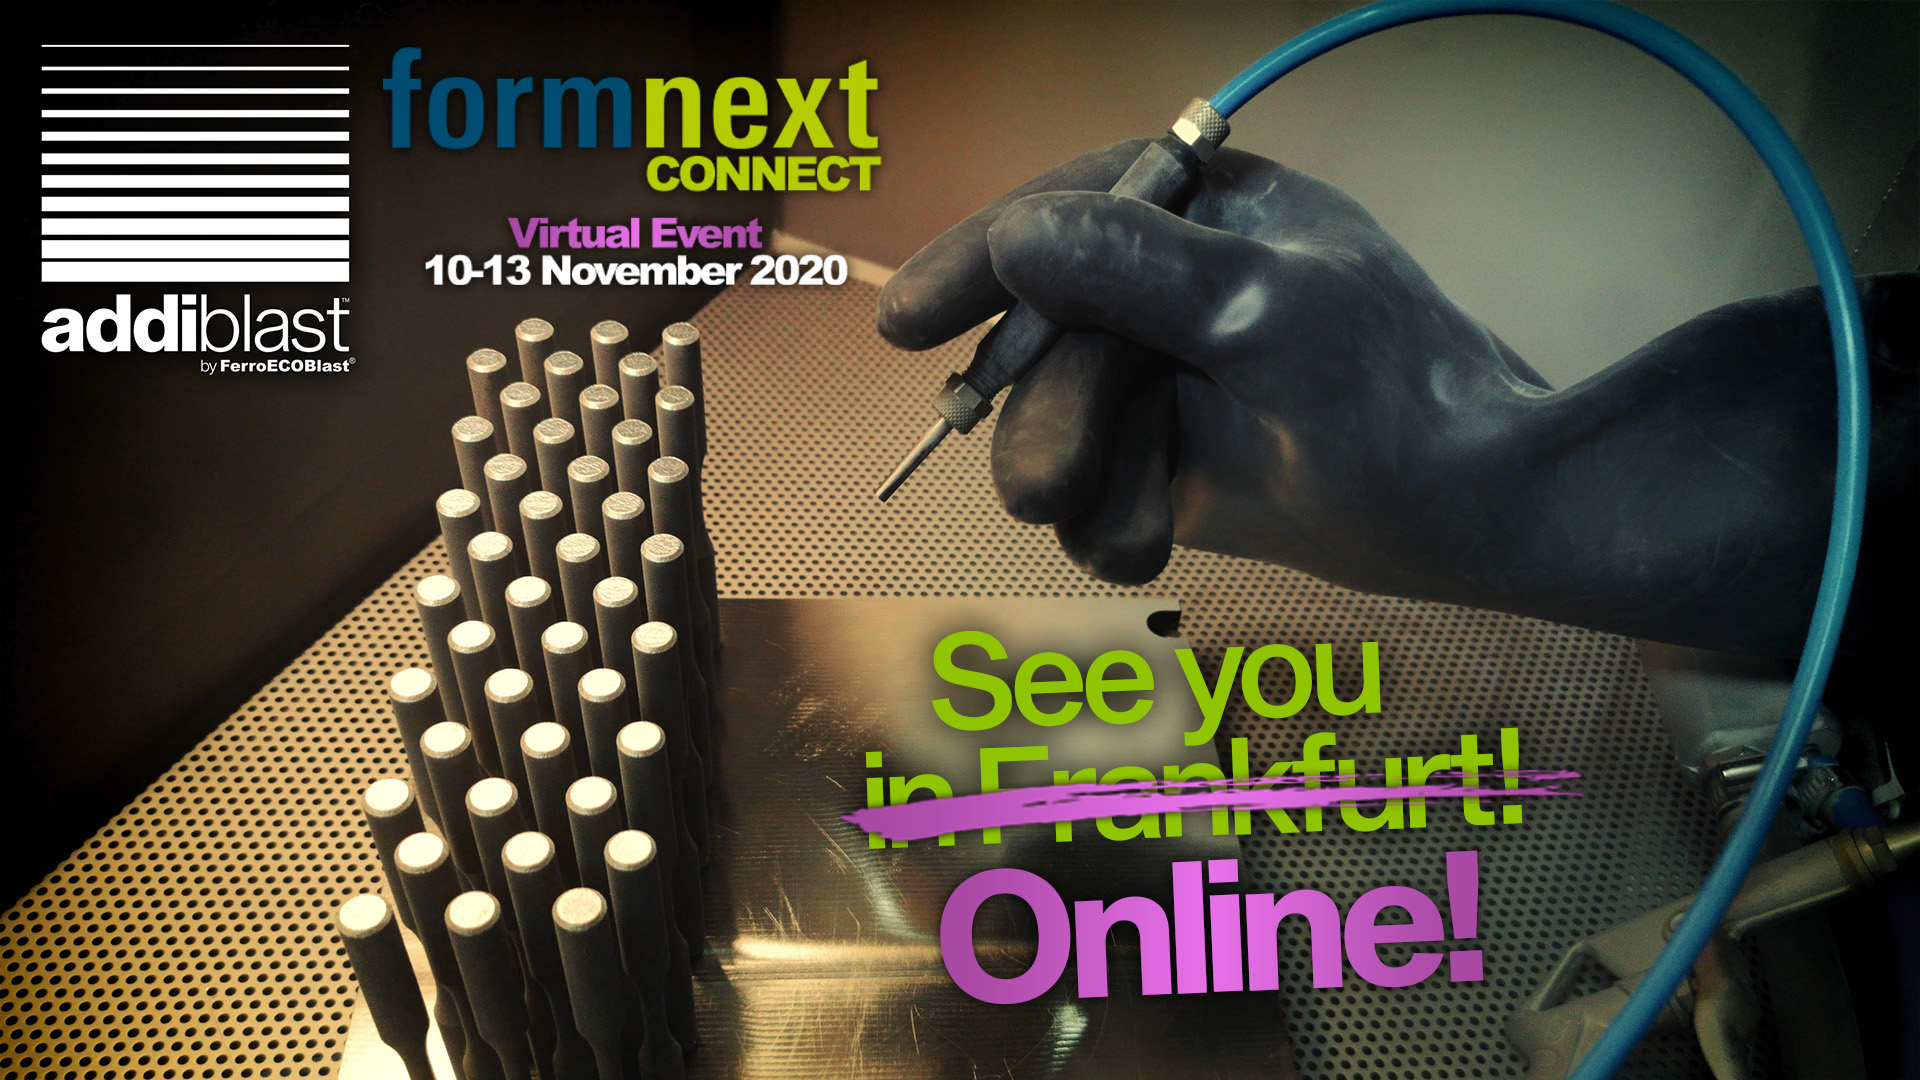 <h2>Meet us at <span style="color: rgb(196, 22, 28);"><strong>Formnext Connect 2020</strong></span><strong>&nbsp;</strong>in Frankfurt!</h2>